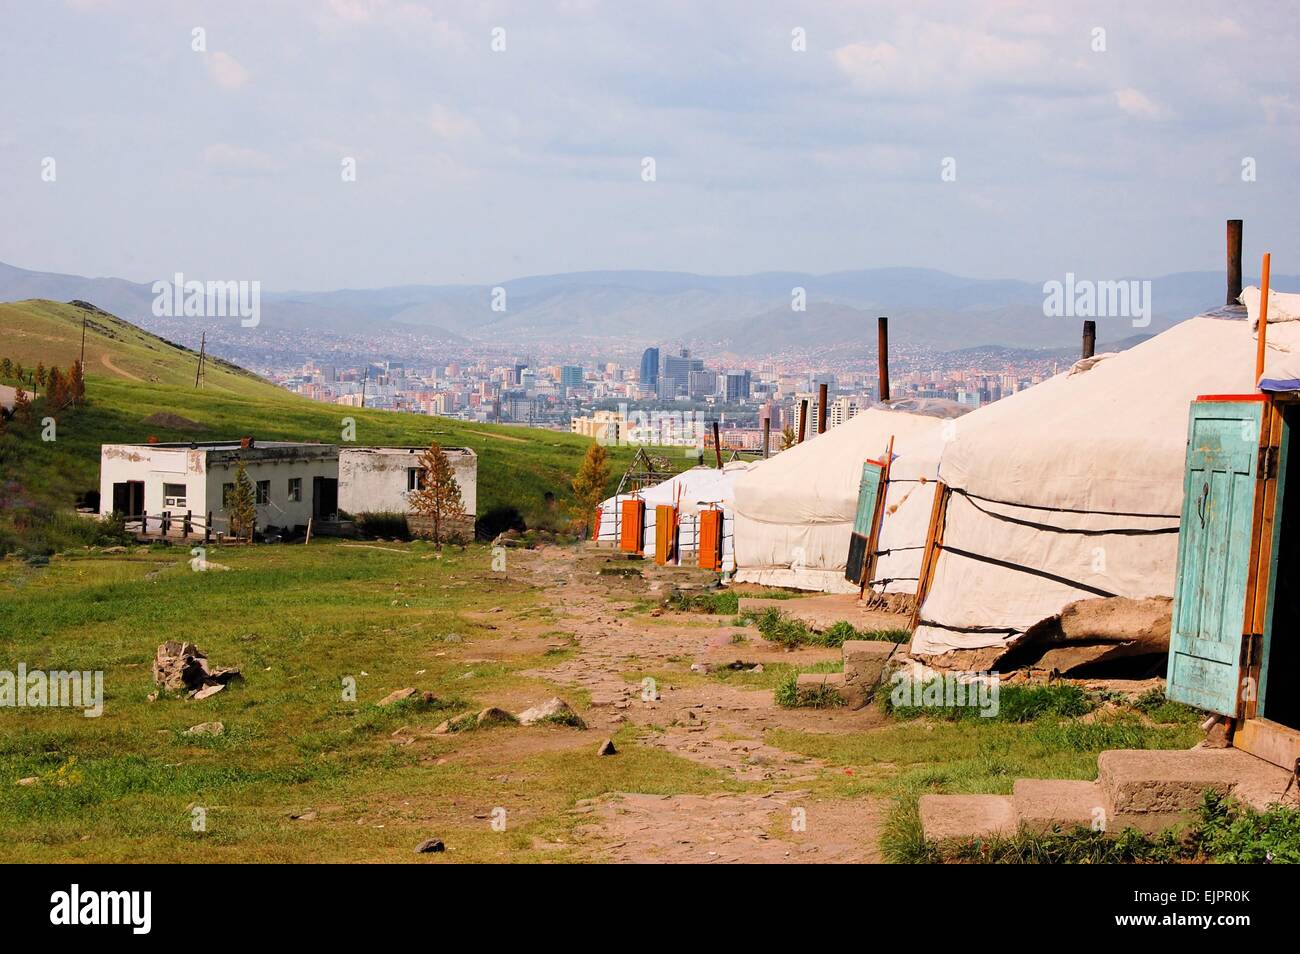 Mongolian ger tents in the hills above Ulan Bator, Mongolia Stock Photo